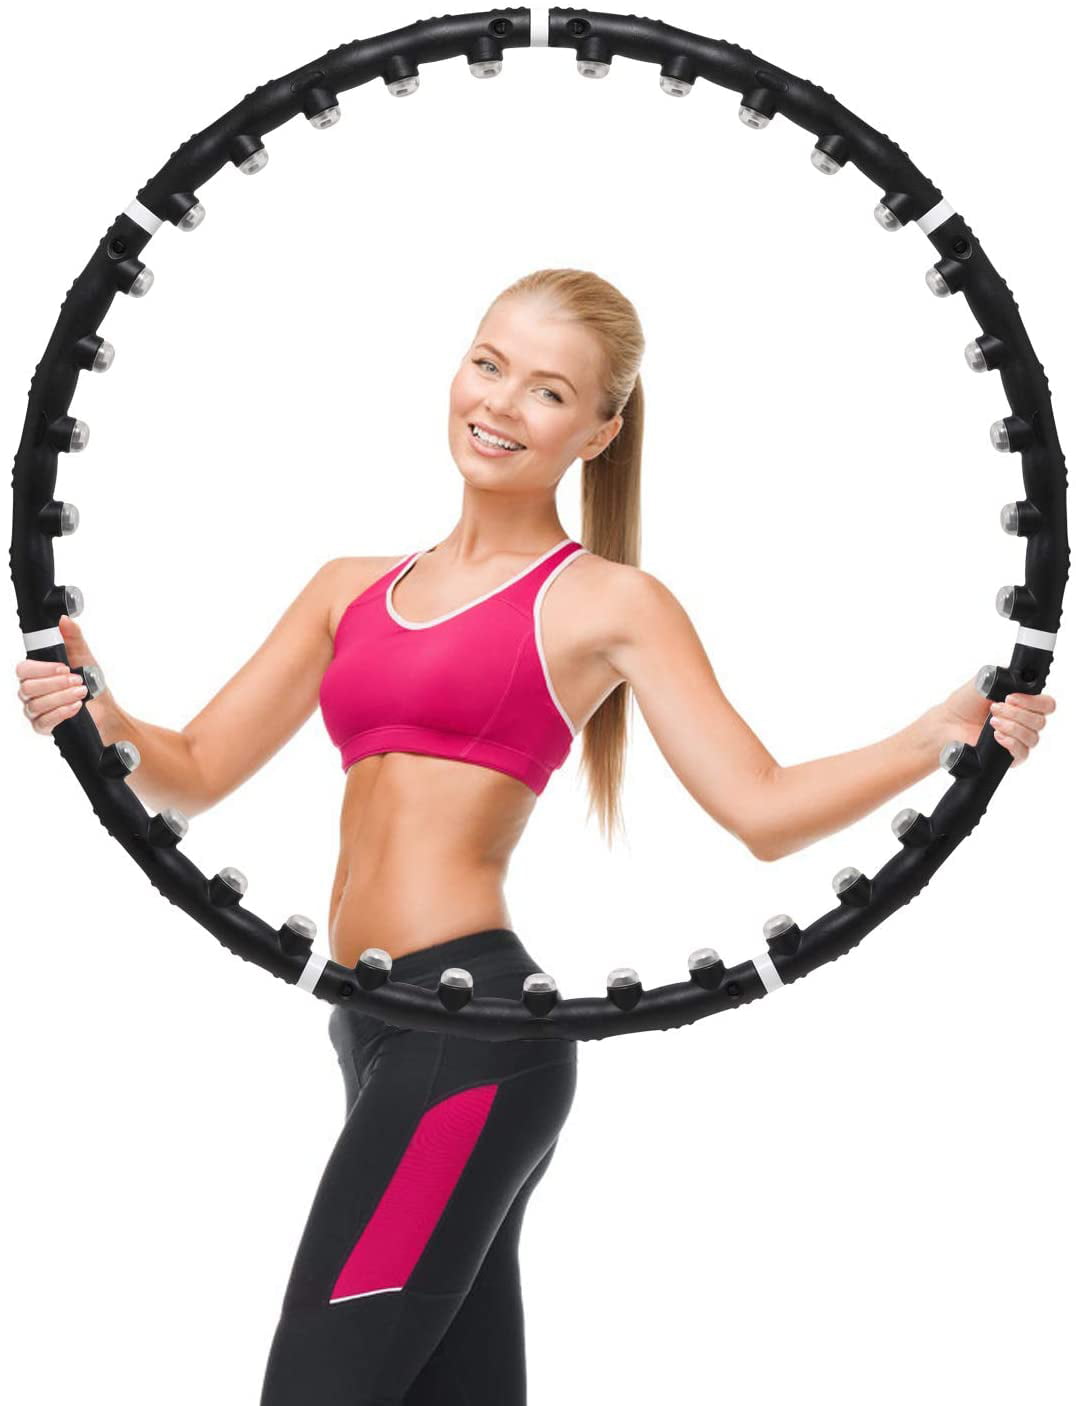 Details about   Hula Hoop Tyre 8 segments Removable Hoola Hoops Fitness Sport Abdominal Trainer show original title 